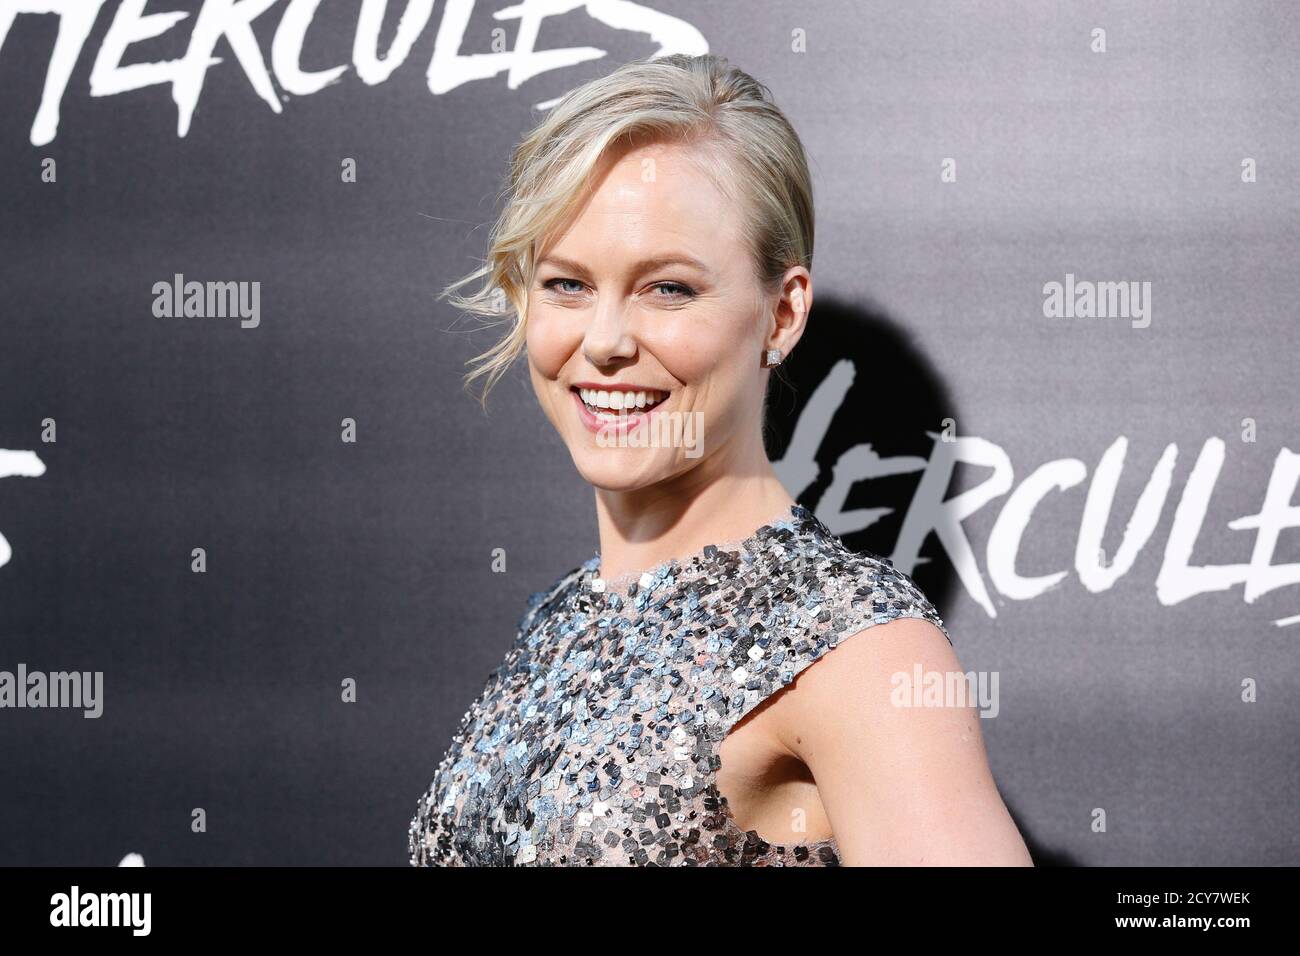 Cast member Ingrid Bolso Berdal poses at the Los Angeles premiere of 'Hercules' in Hollywood, California July 23, 2014.  REUTERS/Danny Moloshok   (UNITED STATES - Tags: ENTERTAINMENT) Stock Photo